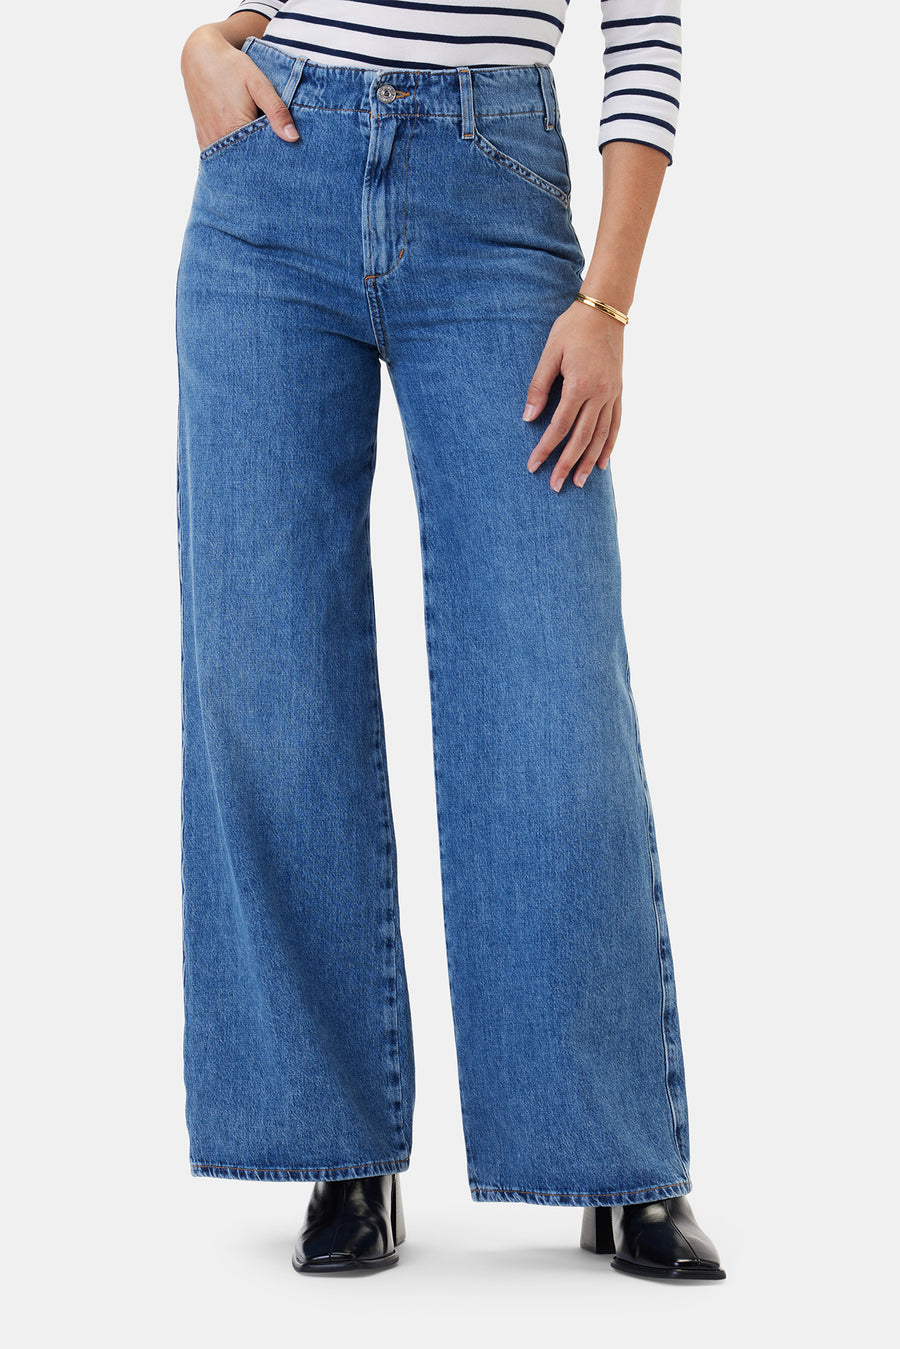 Citizens of Humanity Paloma Utility Trouser Jean - Poolside